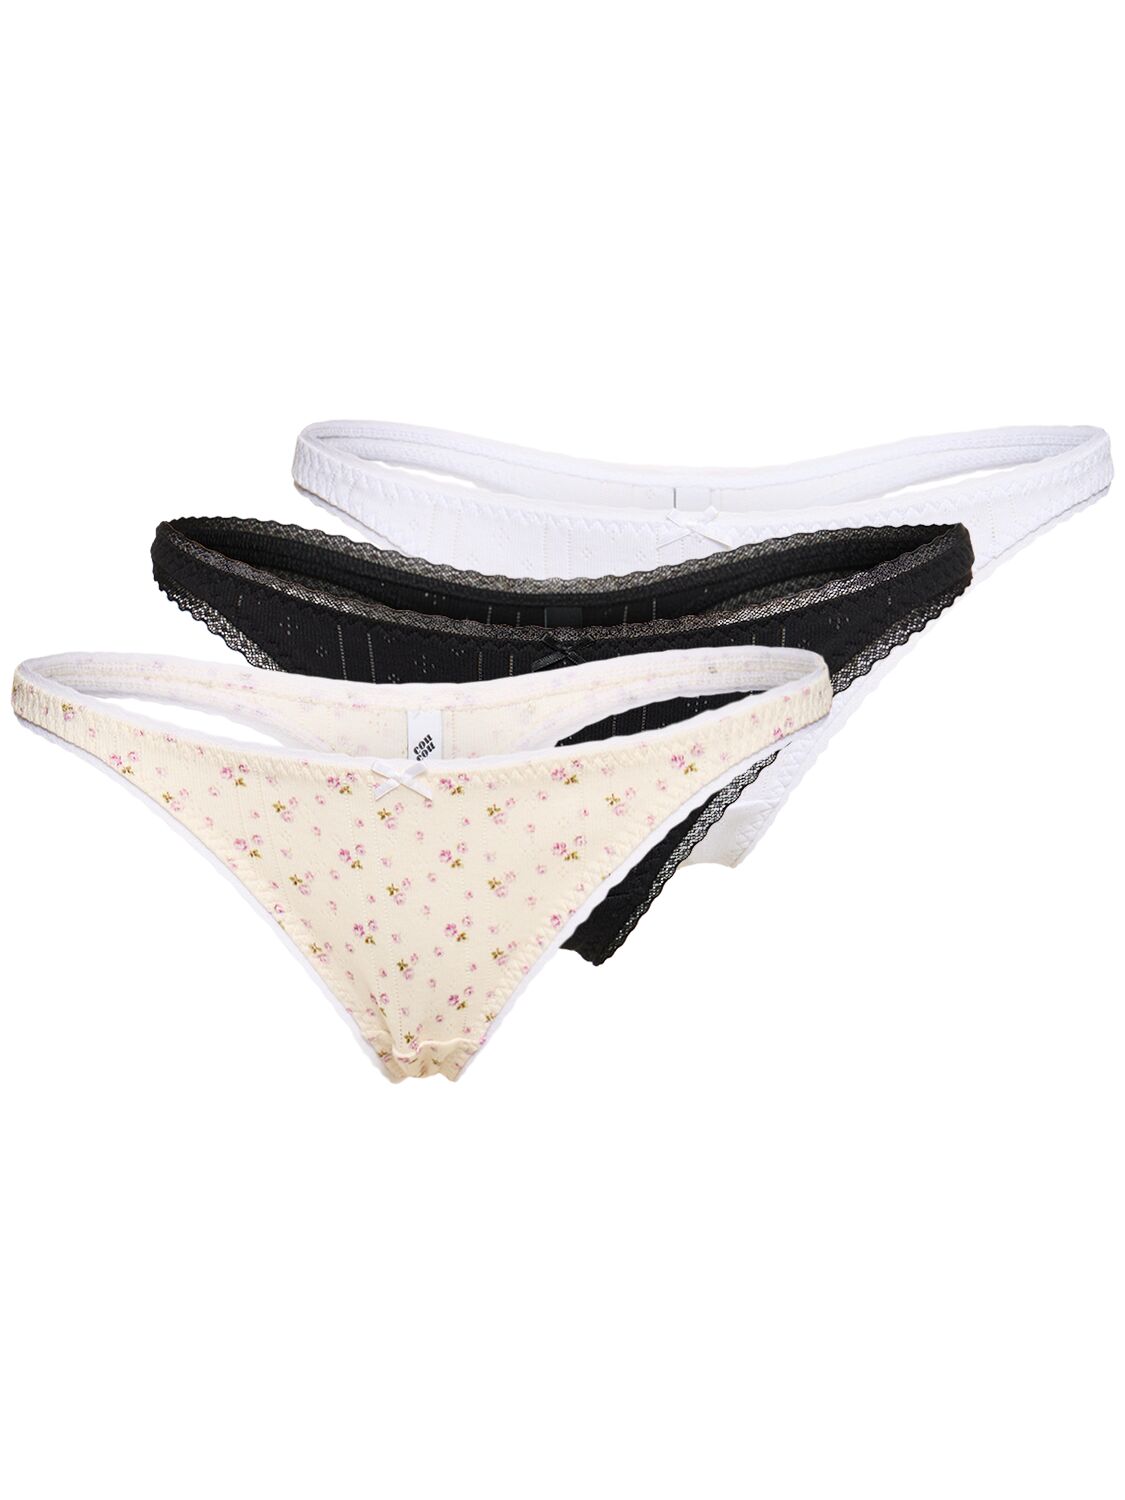 Cou Cou Set Of 3 The Pointelle Cotton Thongs In Black,white,rose